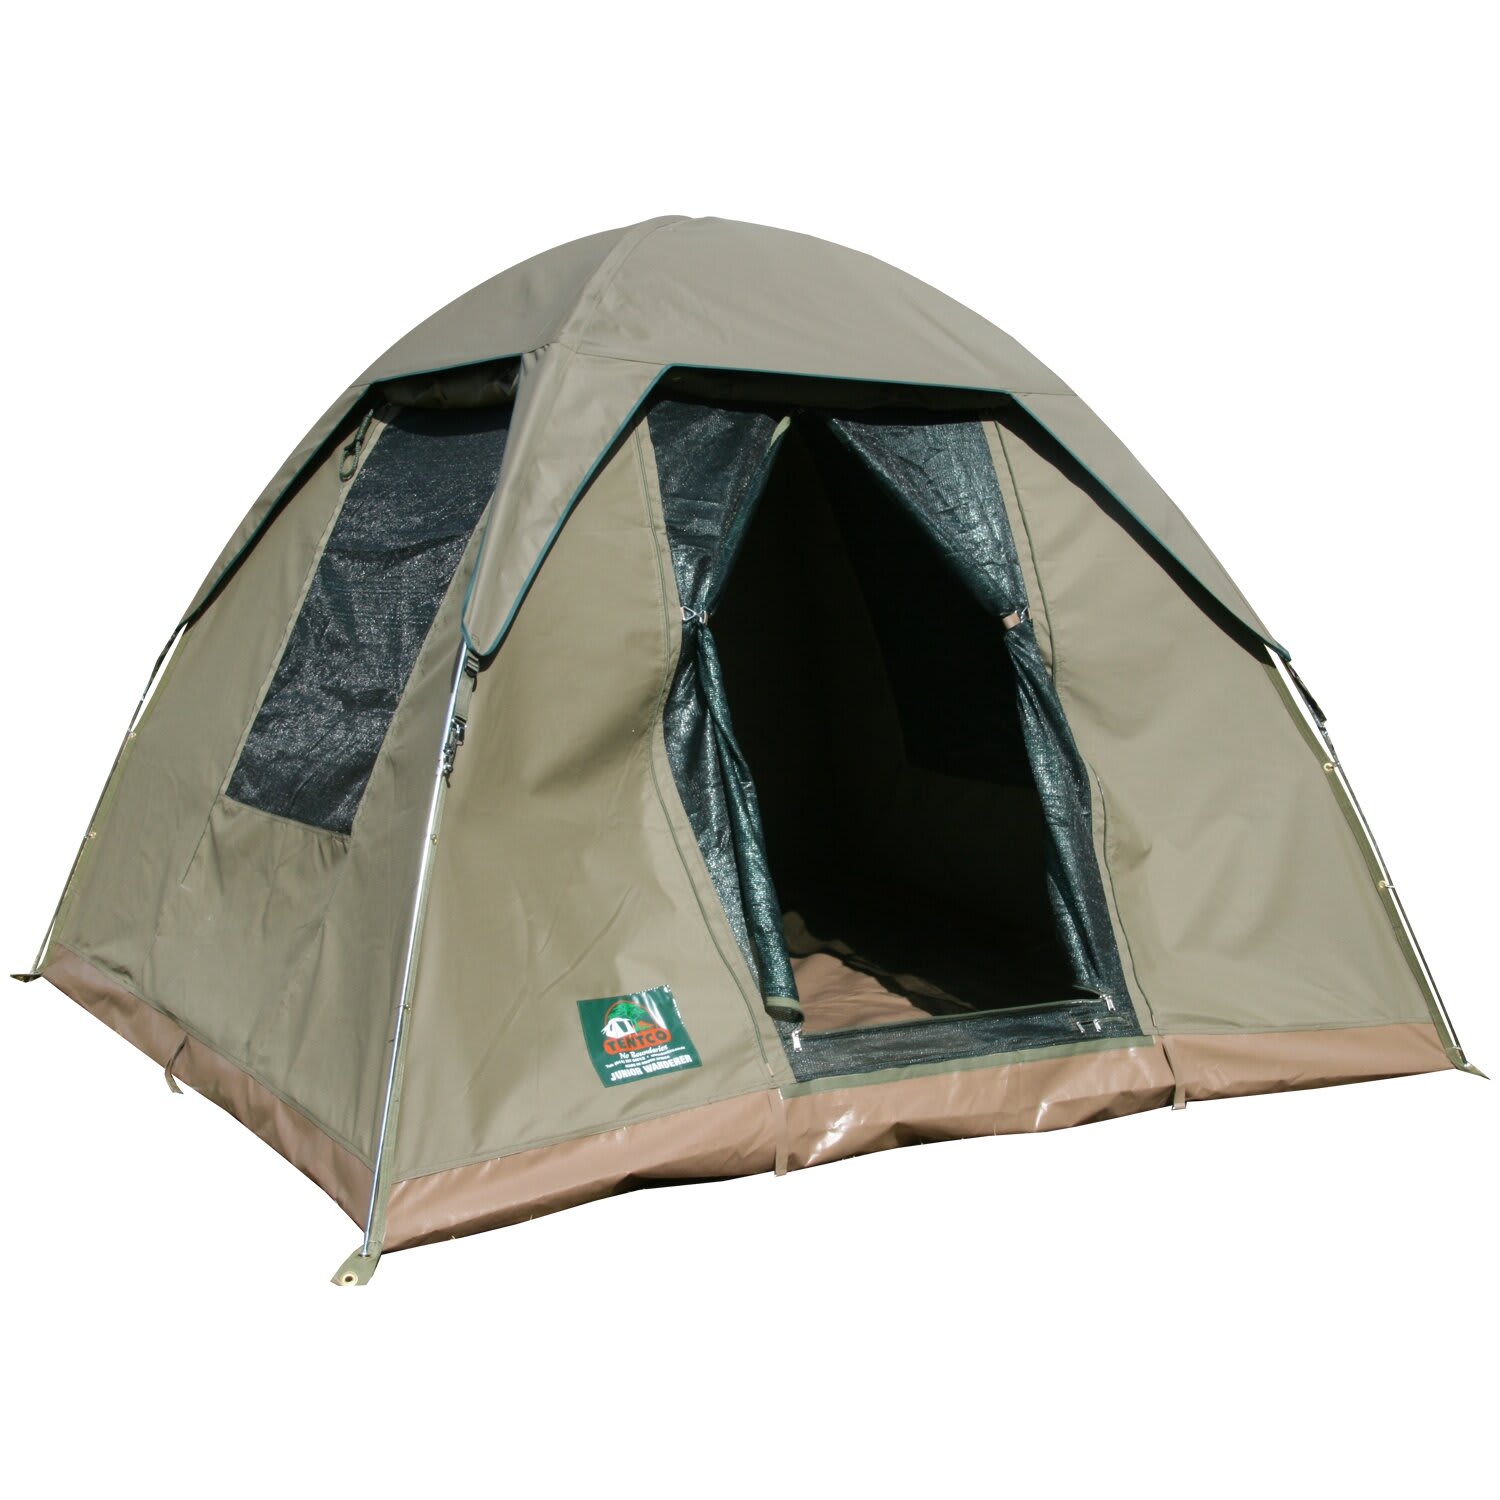 Tent dome 15 Best